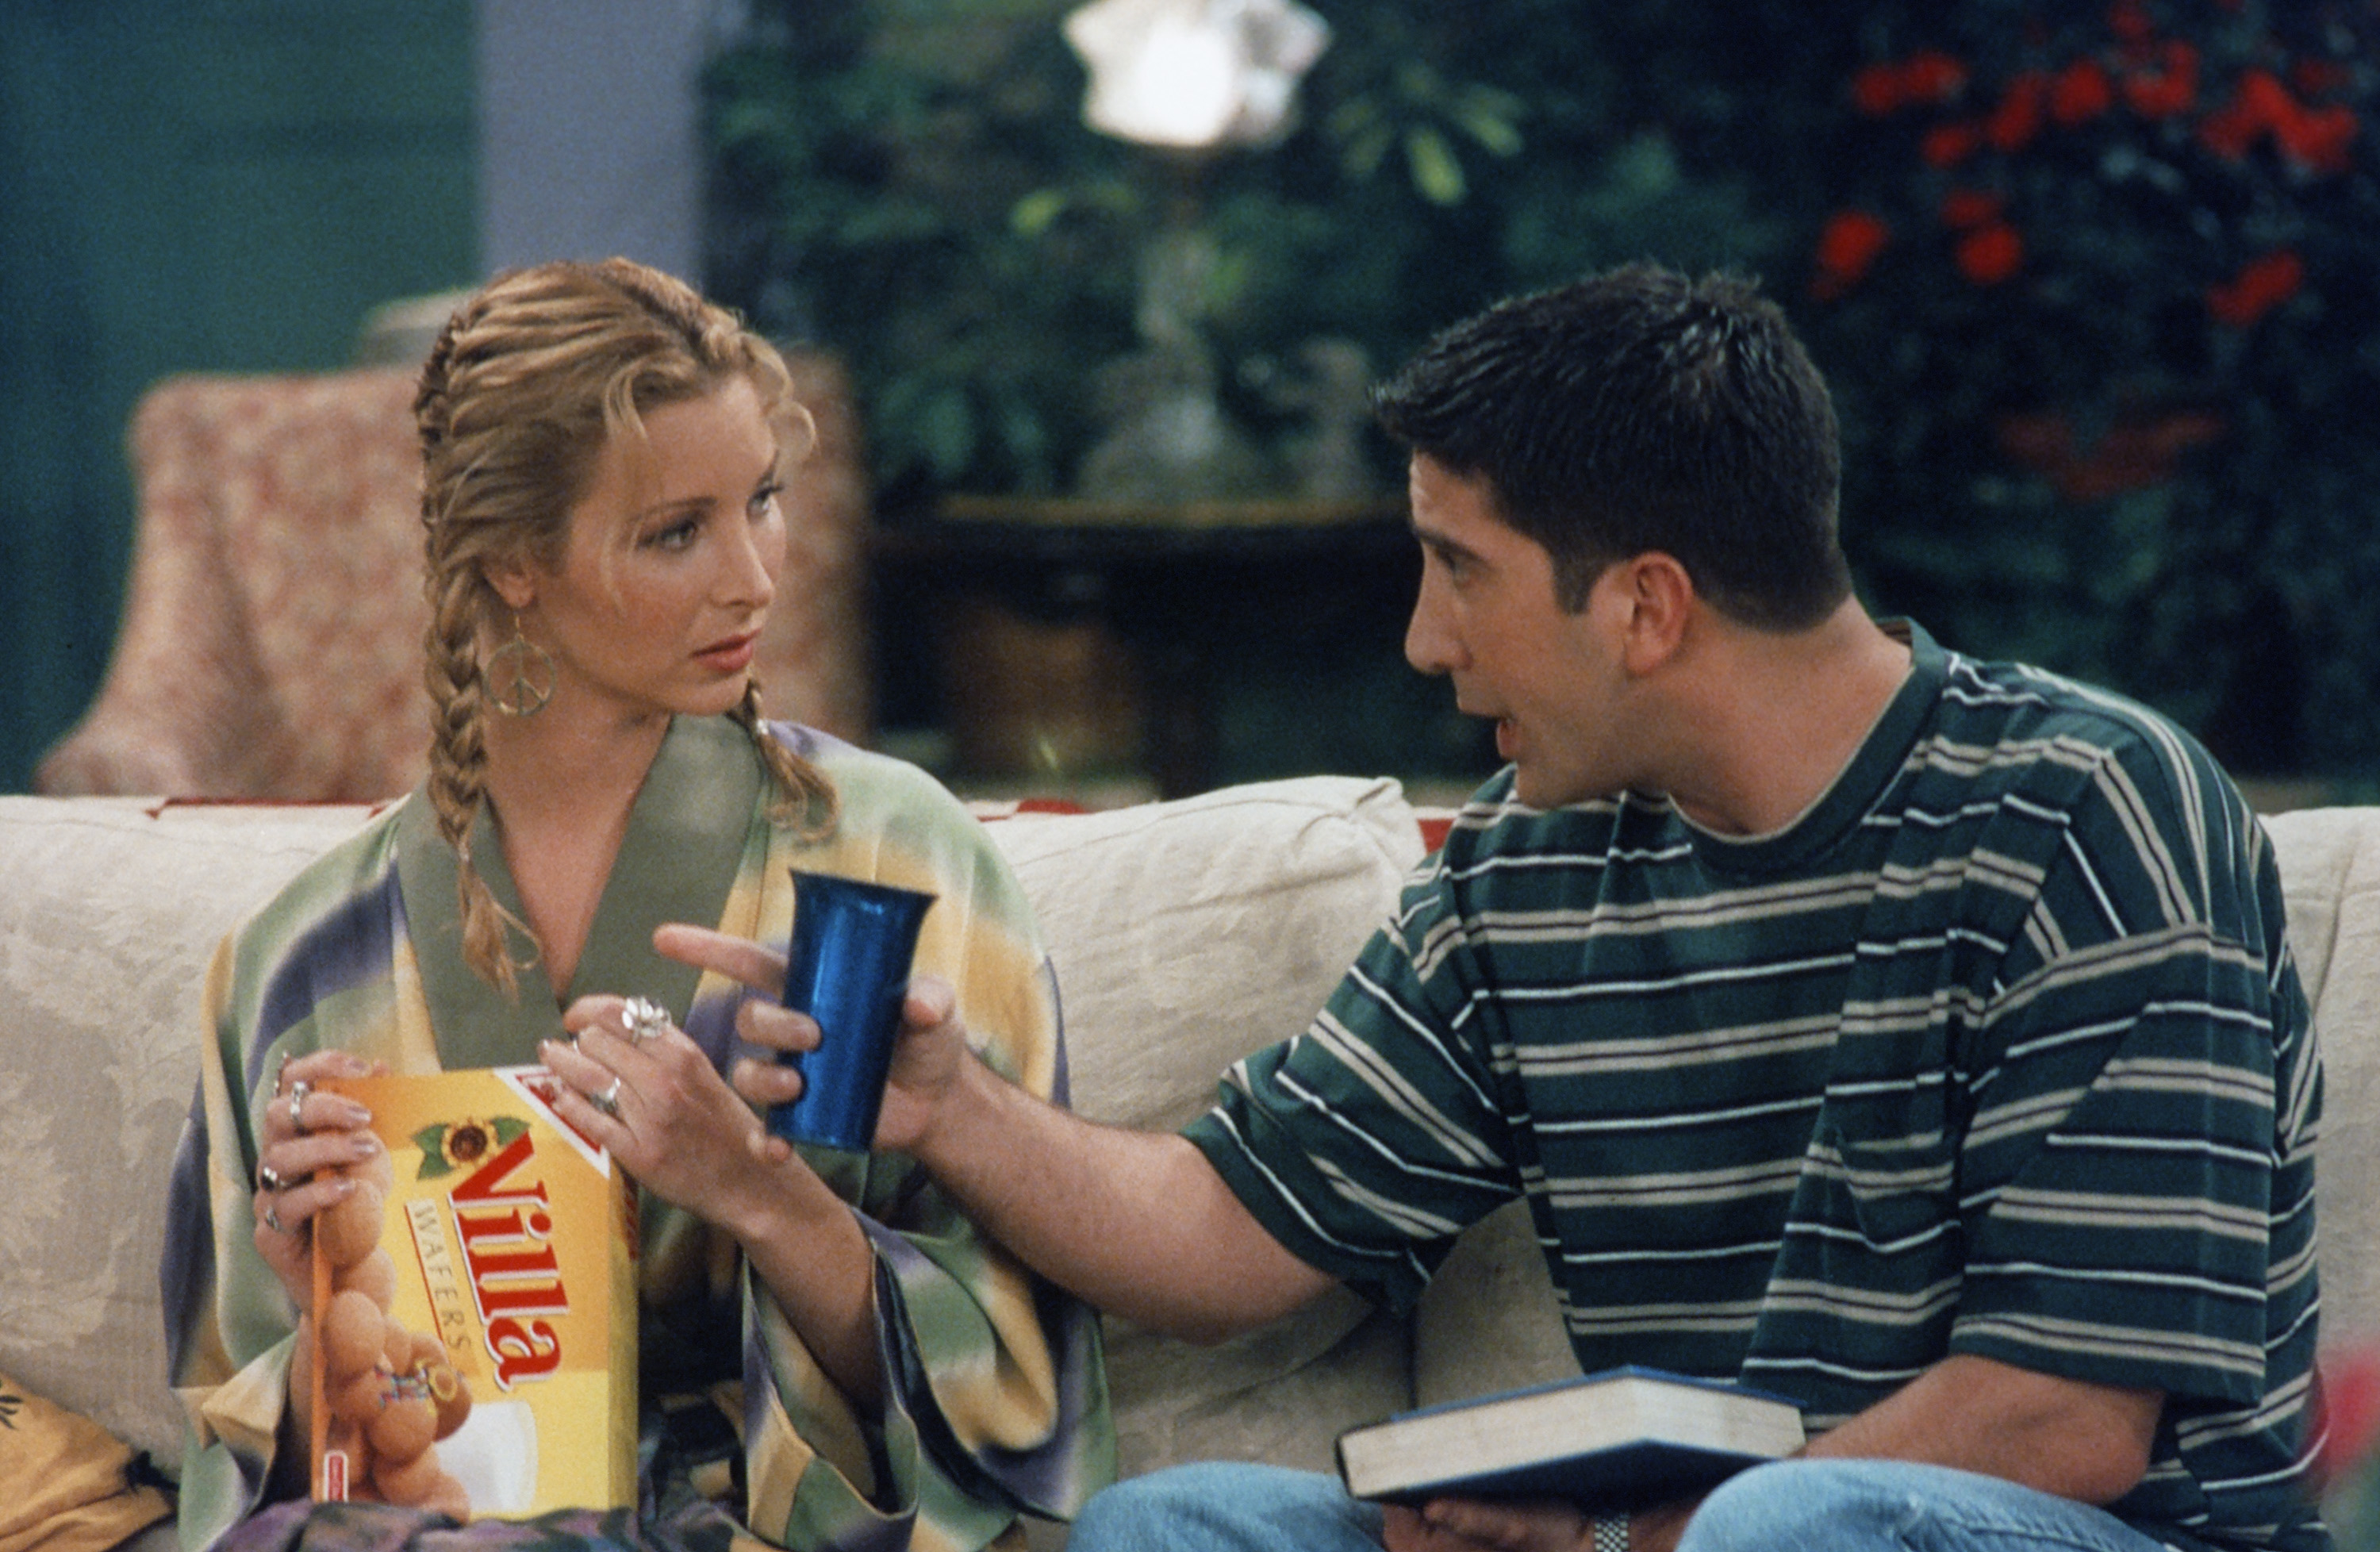 Lisa Kudrow, in a robe, holds a box of Vanilla Wafers while David Schwimmer, in a striped shirt, gestures to her with a cup on a sofa